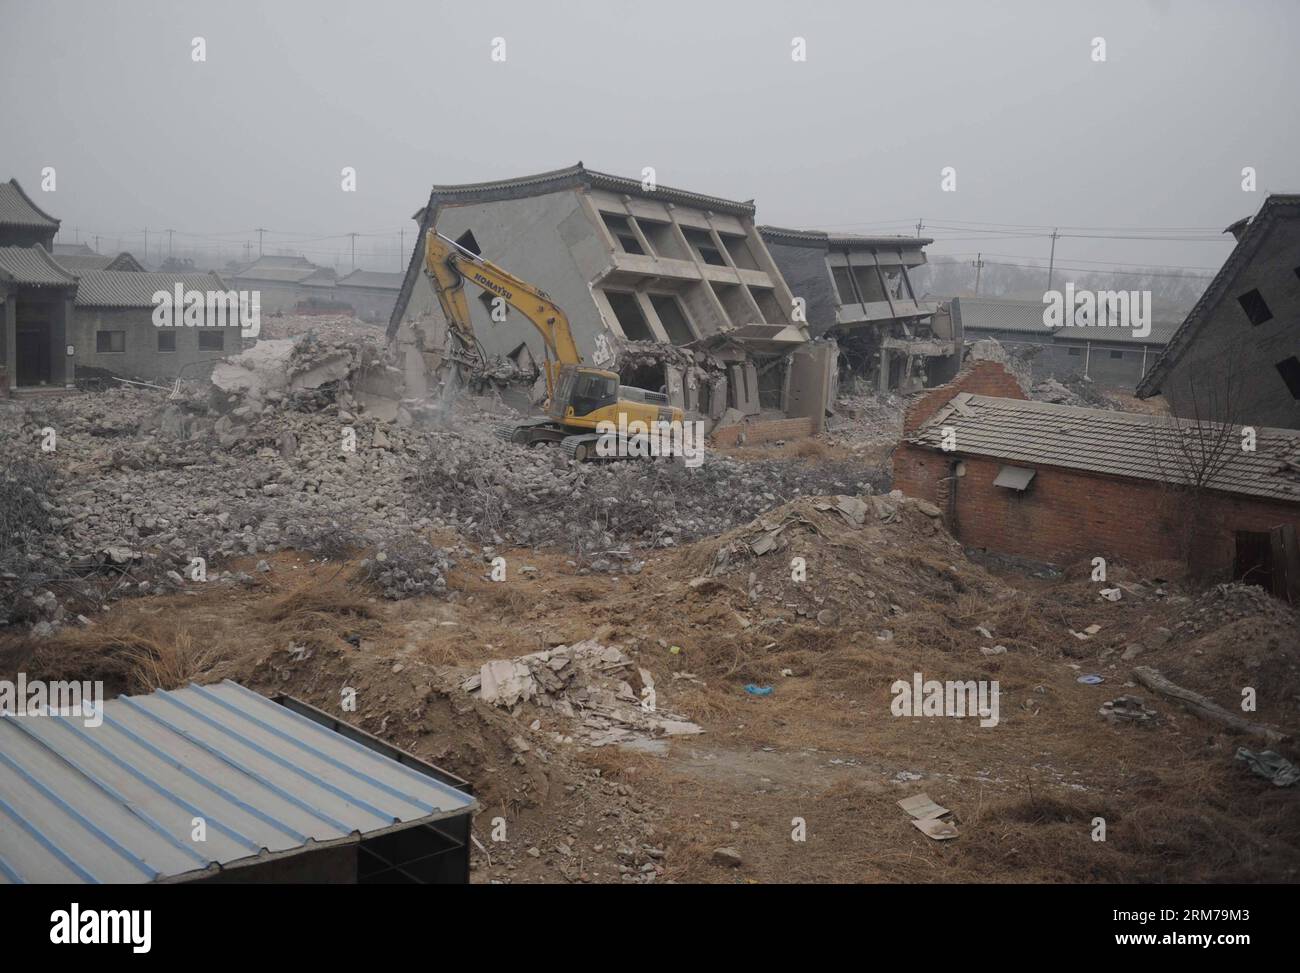 (140220) -- BEIJING, Feb. 20, 2014 (Xinhua) -- An excavator demolishes illegal houses in Zhenggezhuang Village, Beiqijia Township of Changping District on the outskirt of Beijing, China, Feb. 20, 2014. Those illegal houses cover an area of 108.55 mu (about 7.24 hectares) , which will be used for tree planting after complete of demolition. (Xinhua/Luo Xiaoguang) (hdt) CHINA-BEIJING-CHANGPING-ILLEGAL HOUSES-DEMOLITION (CN) PUBLICATIONxNOTxINxCHN   Beijing Feb 20 2014 XINHUA to excavator demolishes illegal Houses in  Village  Township of Chang Ping District ON The outskirts of Beijing China Feb 2 Stock Photo